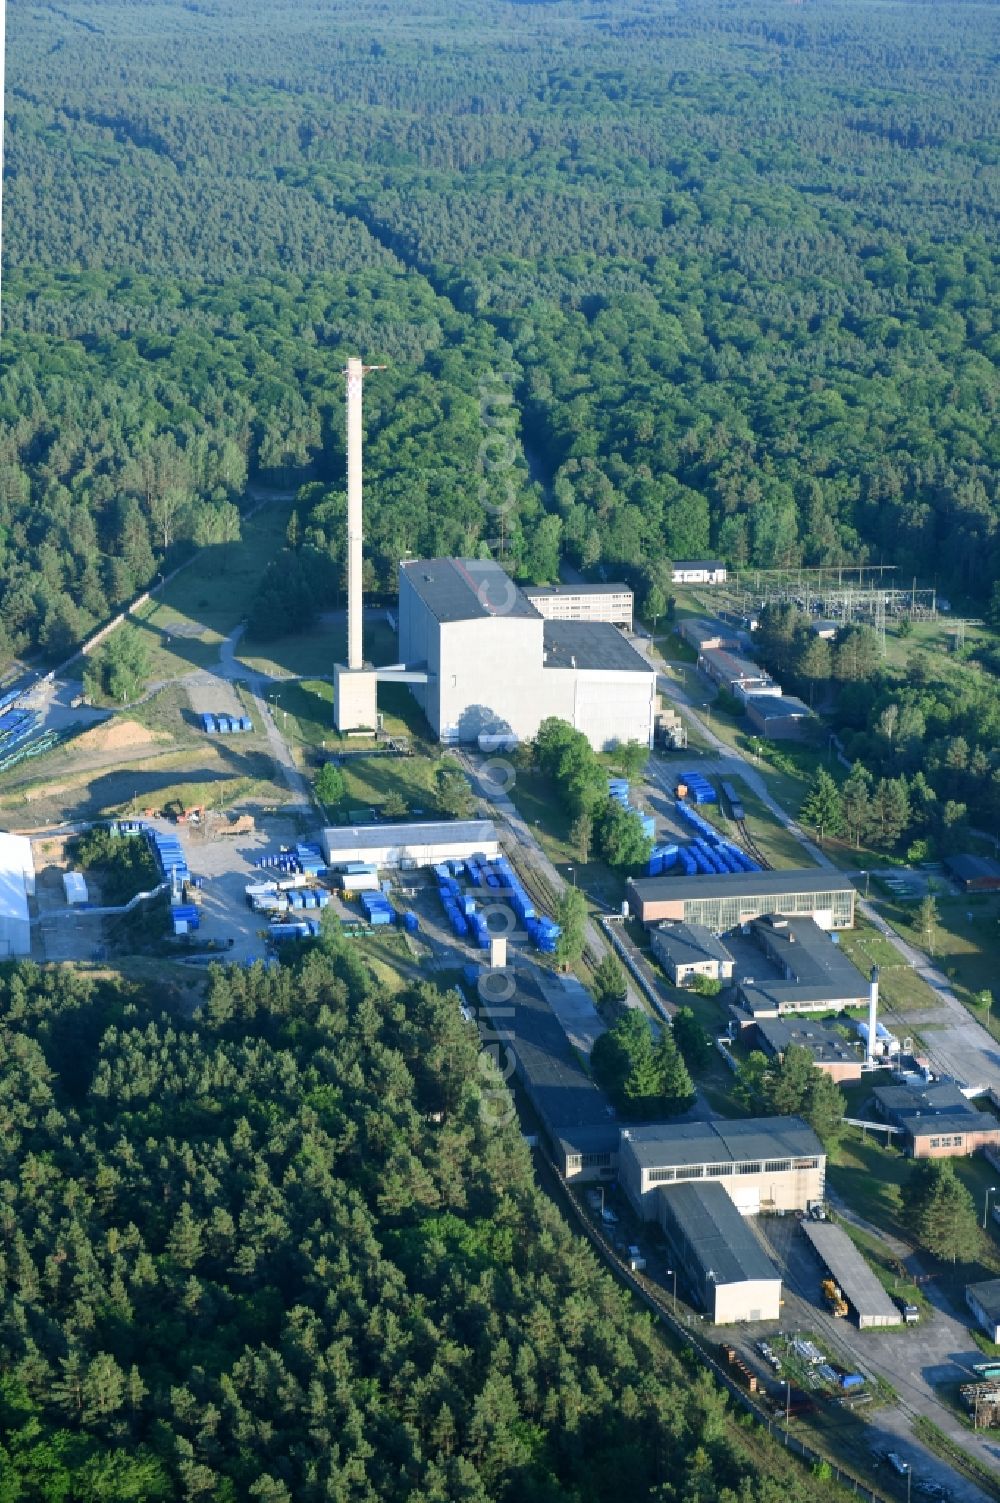 Rheinsberg from above - Building the decommissioned reactor units and systems of the NPP - NPP nuclear power plant in Rheinsberg in the state Brandenburg, Germany